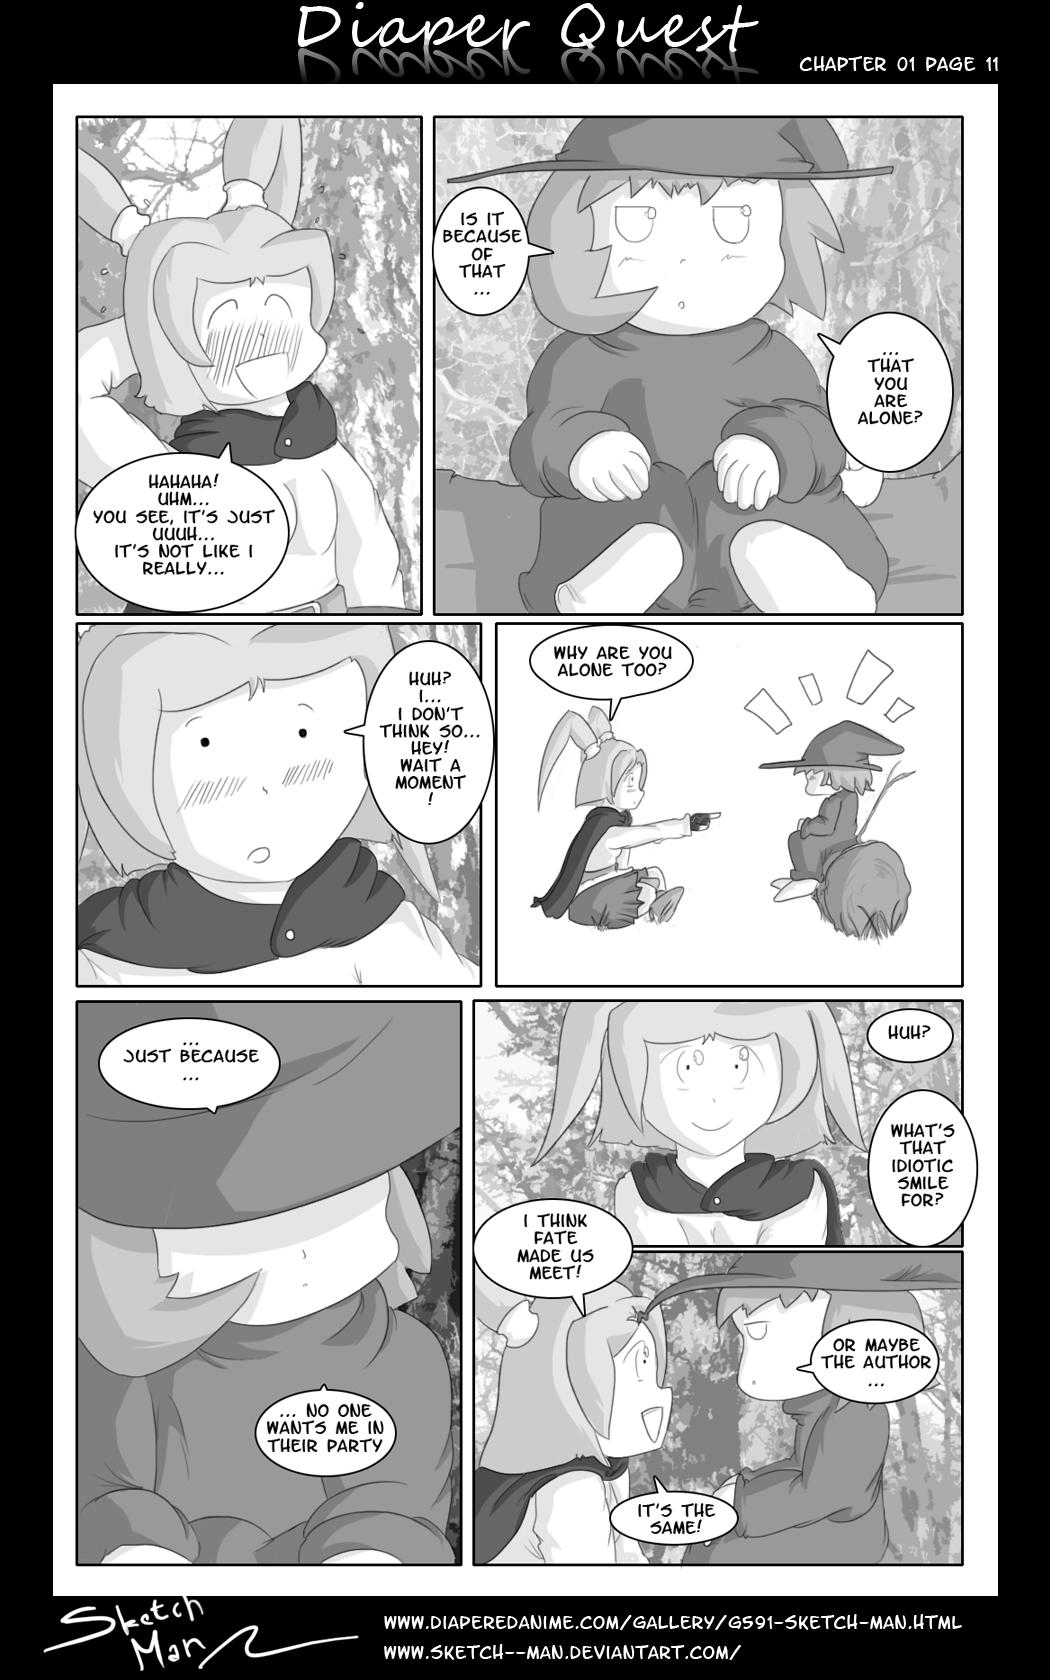 Naked Sluts Sketch Man's Diaper Quest Complete Sister - Page 11